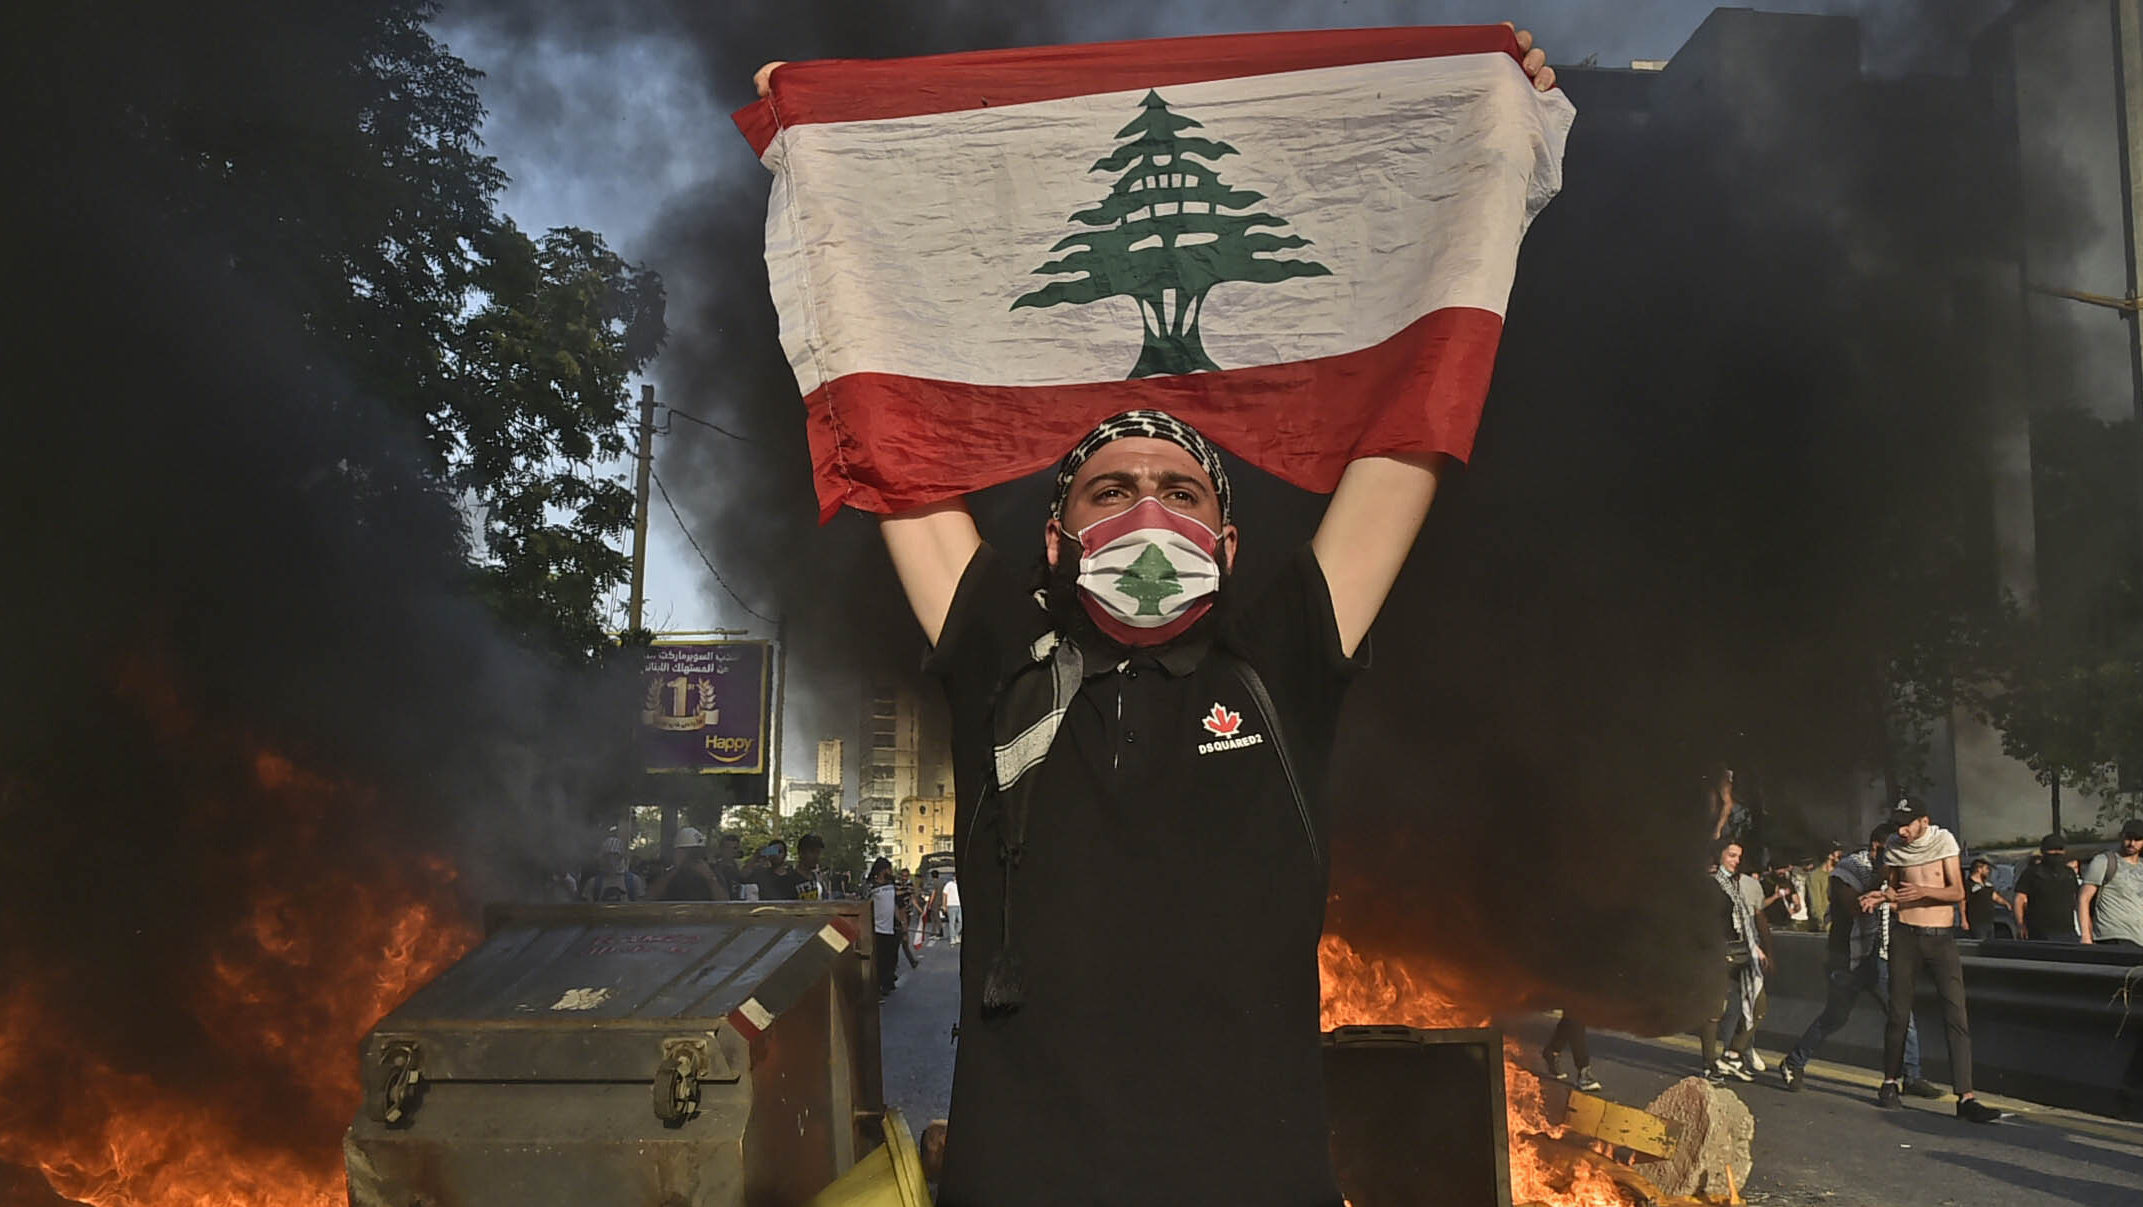 The Beirut Explosion – An Anti-Corruption Domino Effect